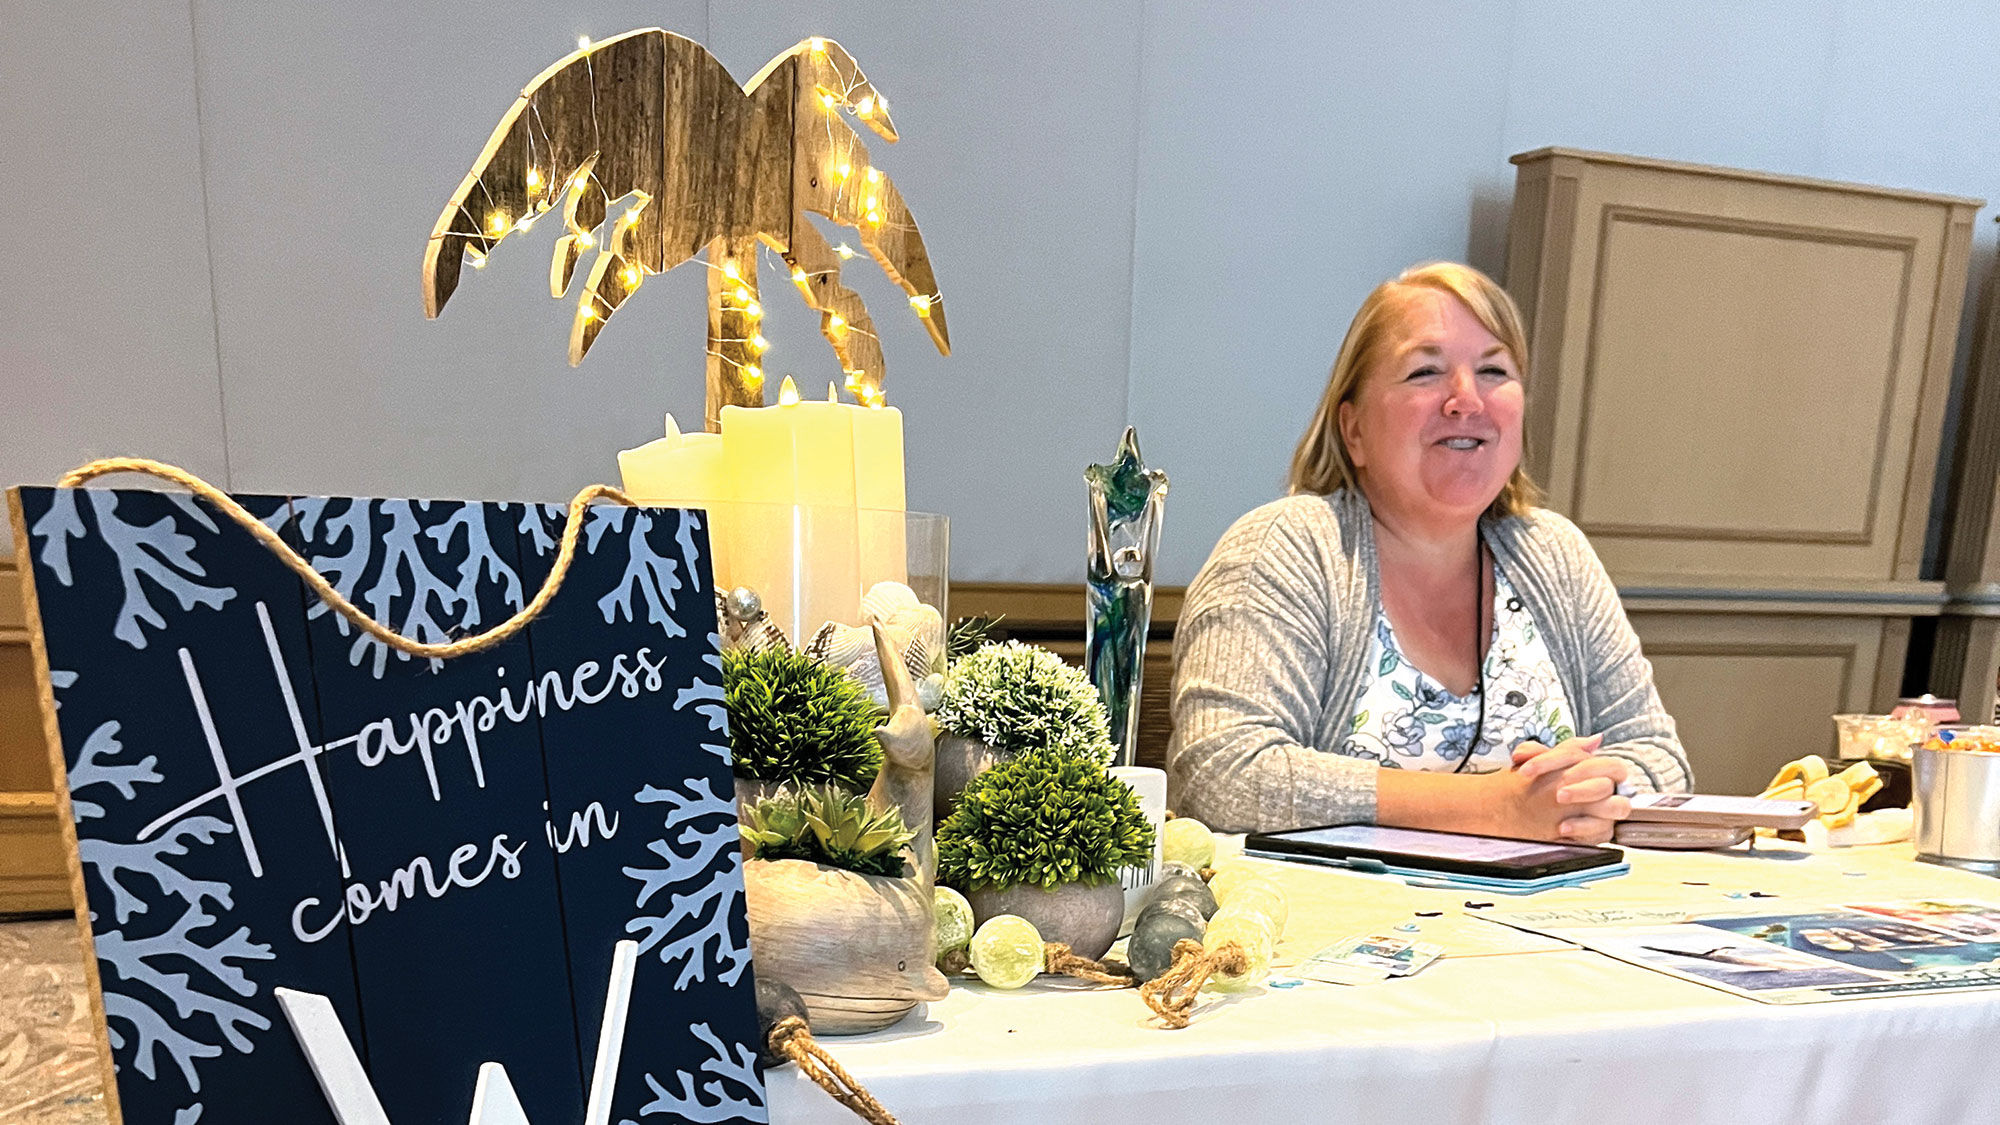 Tina Bradley of Wish You Were Here Vacations in Winter Haven, Fla., was a winner of GTM table design, she said (there was no official competition this year). Her sign says "happiness comes in waves" -- and yes, she sells cruises.